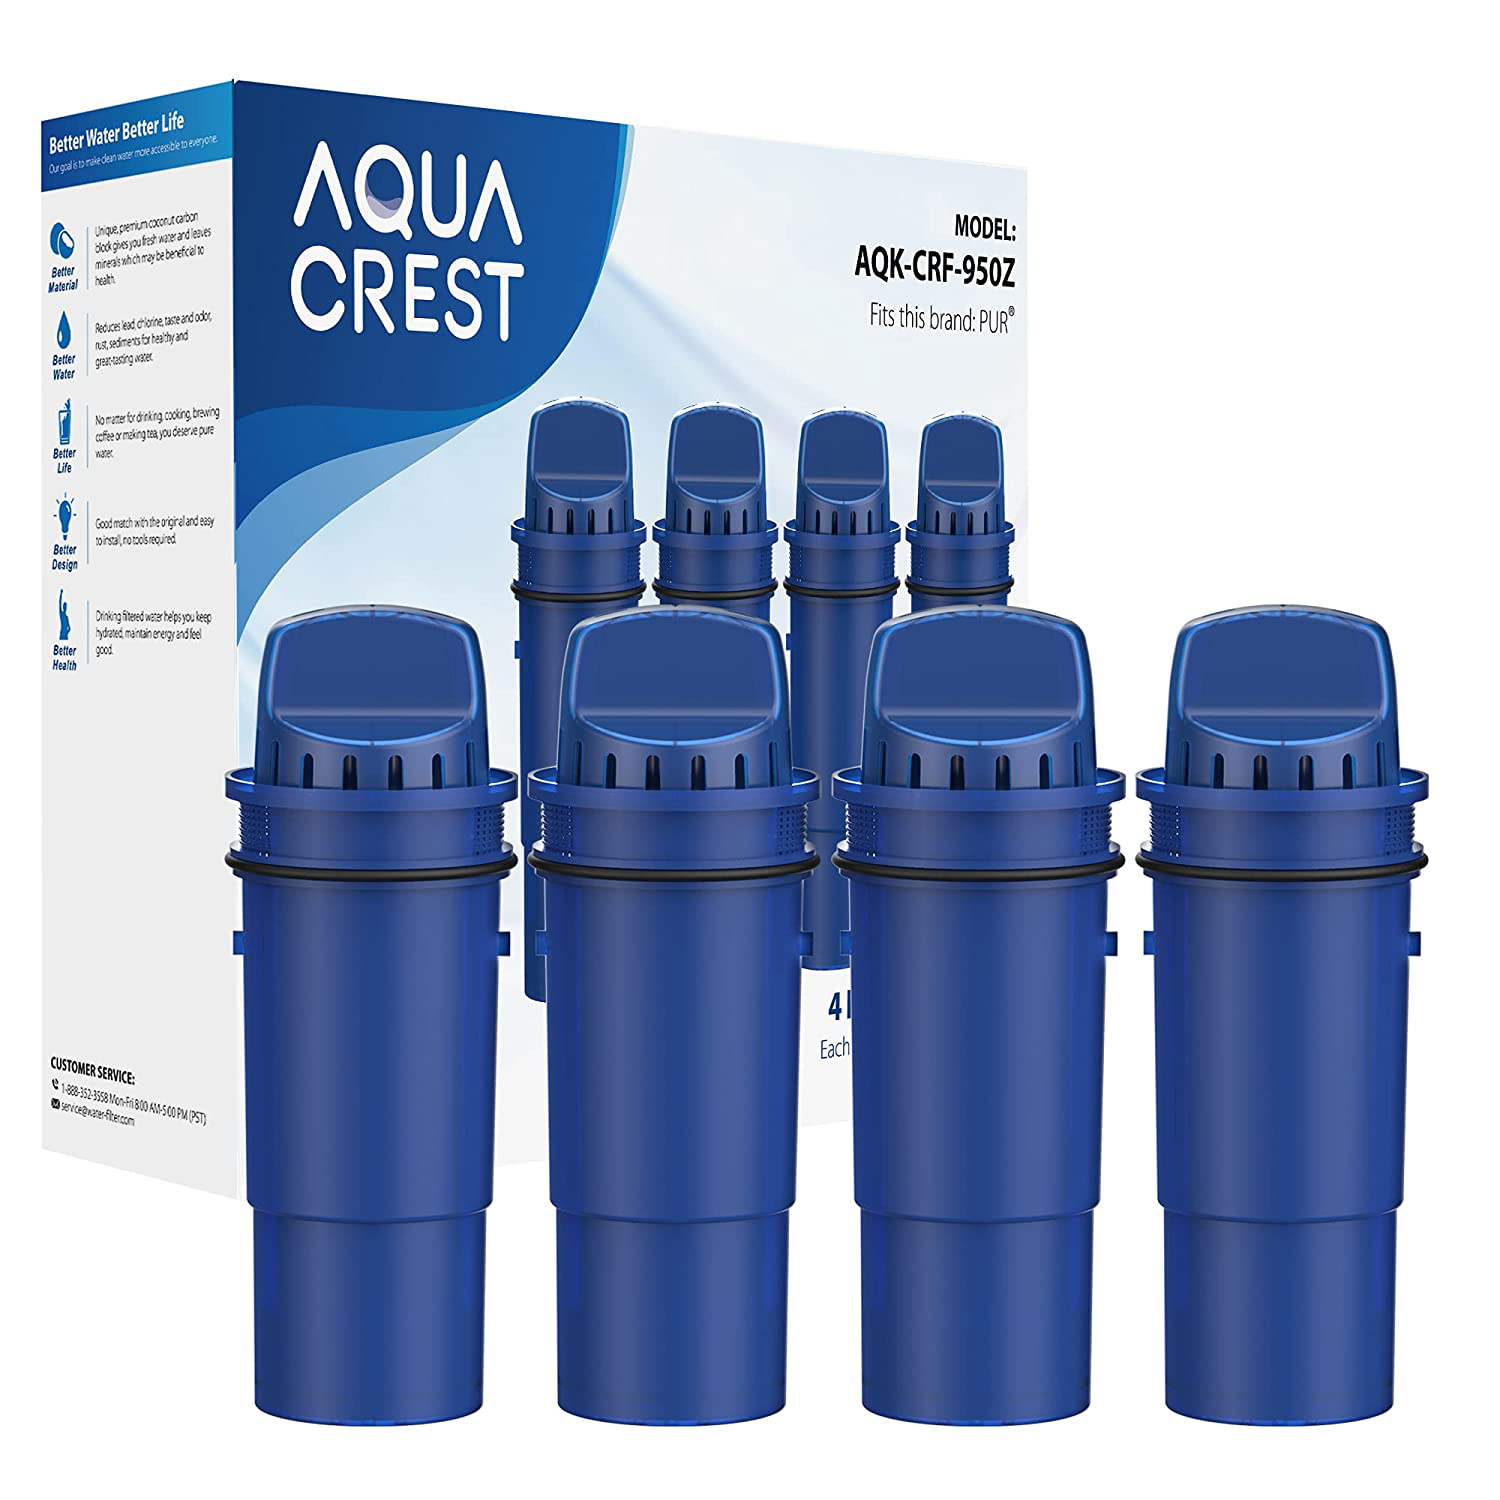 AQUA CREST CRF-950Z NSF Certified Pitcher Water Filter, Replacement for Pur CRF950Z, DS-1800Z, PPT700W, PPF951K, CR-1100C, CR-6000C, PPT711W, PPT711, PPT710W, PPT111W and More Pur Pitchers (Pack of 4)